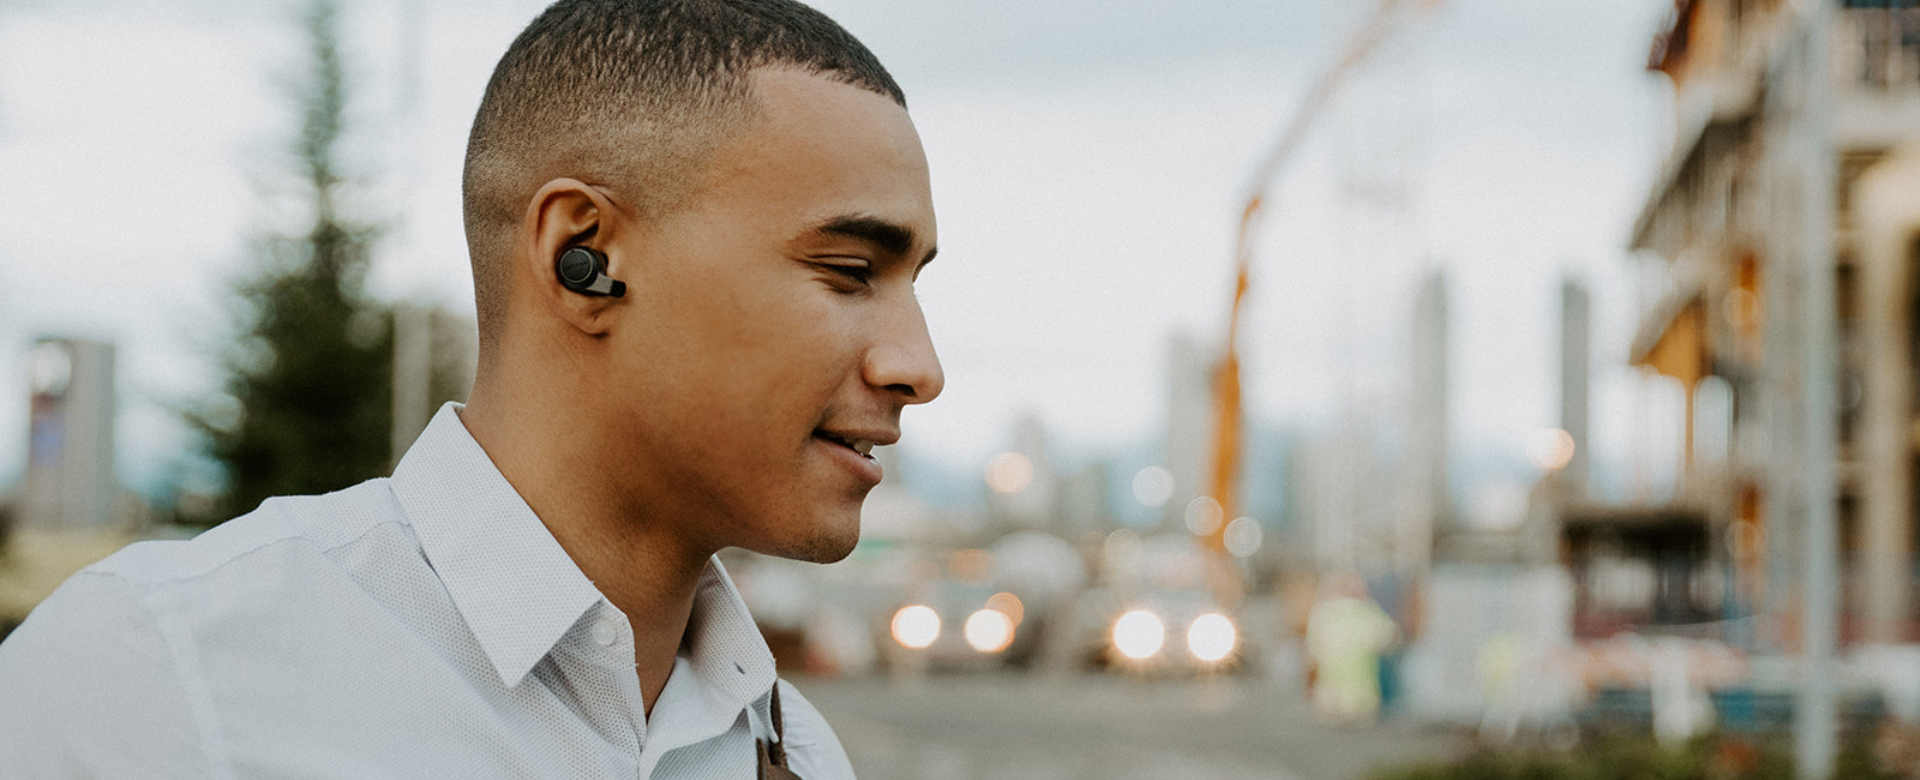 Sony's latest wireless headphones cut out transport hum and city